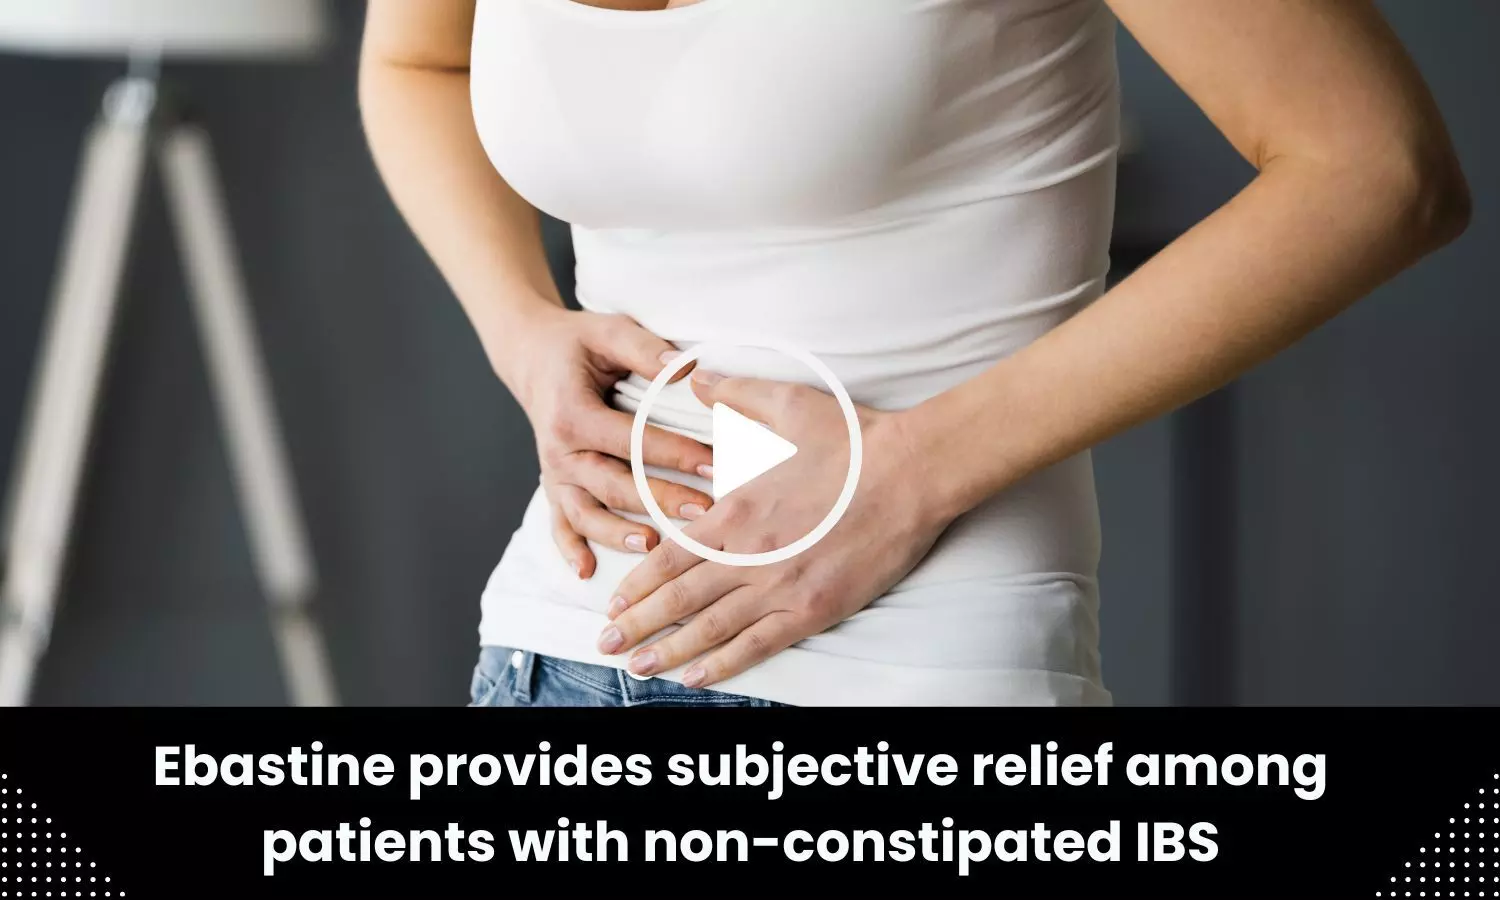 Ebastine provides subjective relief among patients with non-constipated IBS